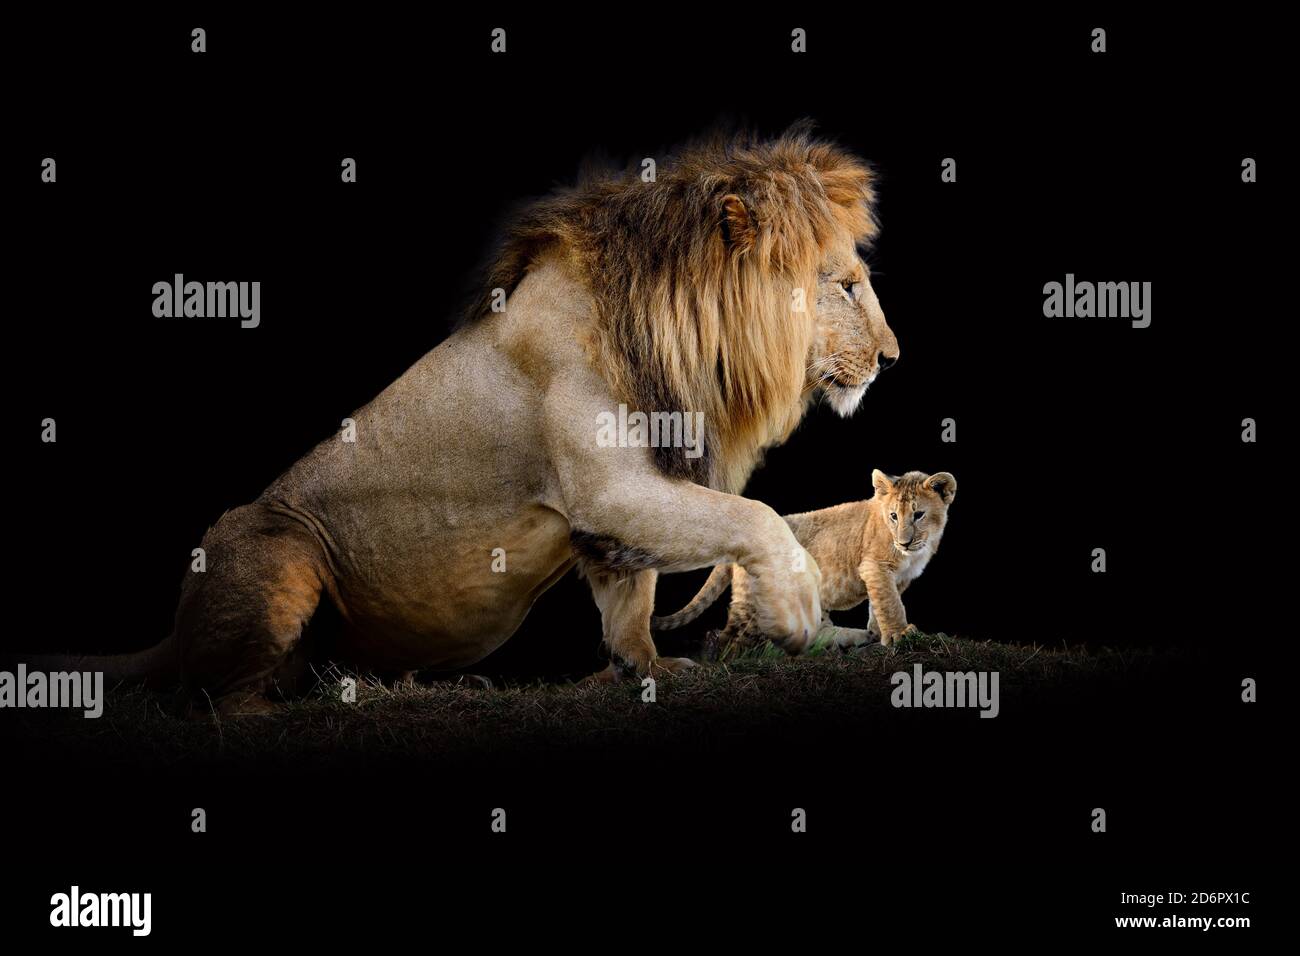 Close up view Lion. Wild animal isolated on a black background Stock Photo